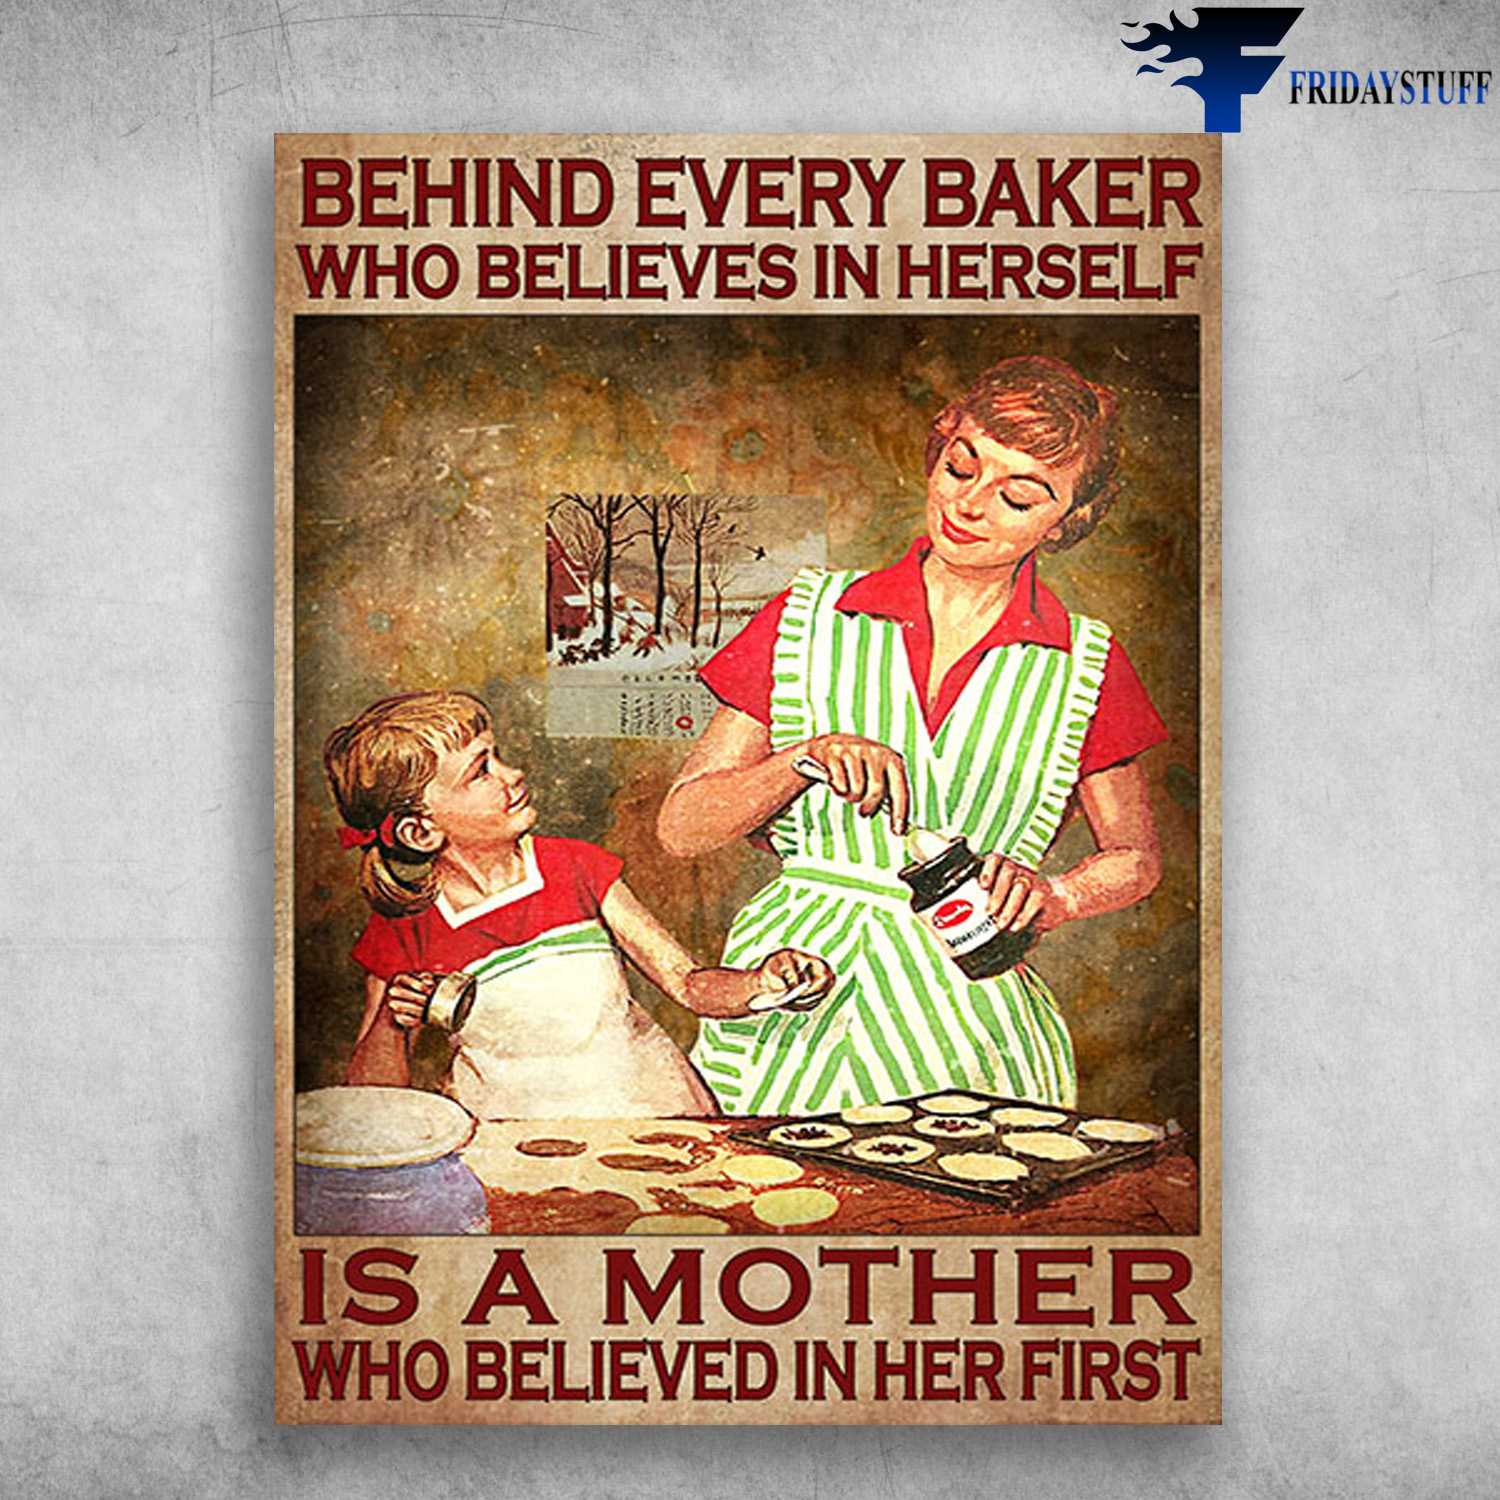 Mom And Daughter, Baking Cake - Behind Everyday Baker, Who Believes In Herself, Is A Mother, Who Believed In Her First